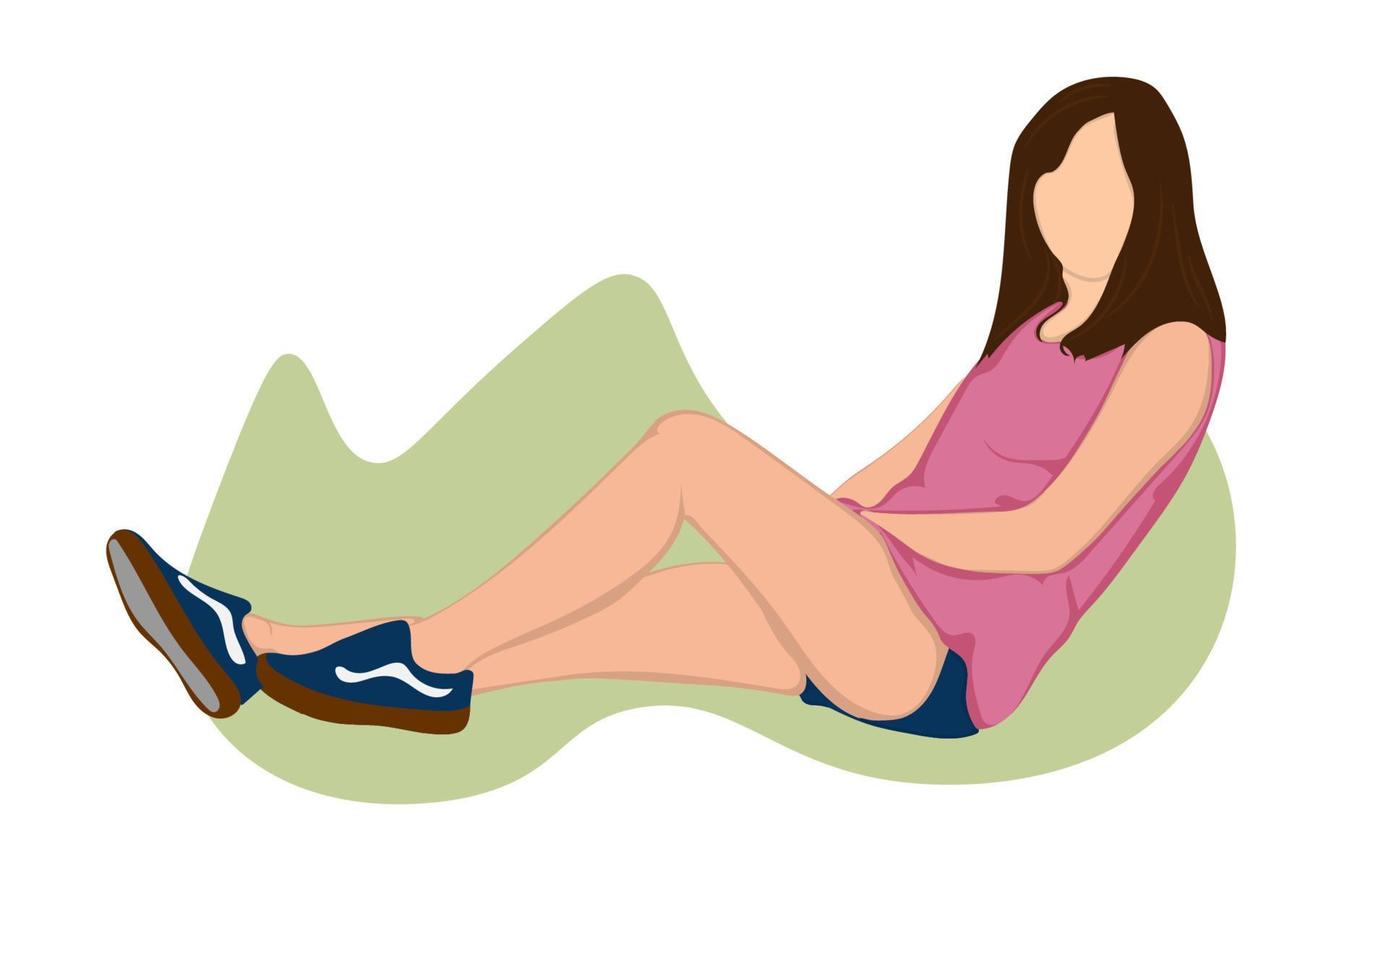 graphics drawing woman exercise vector illustration